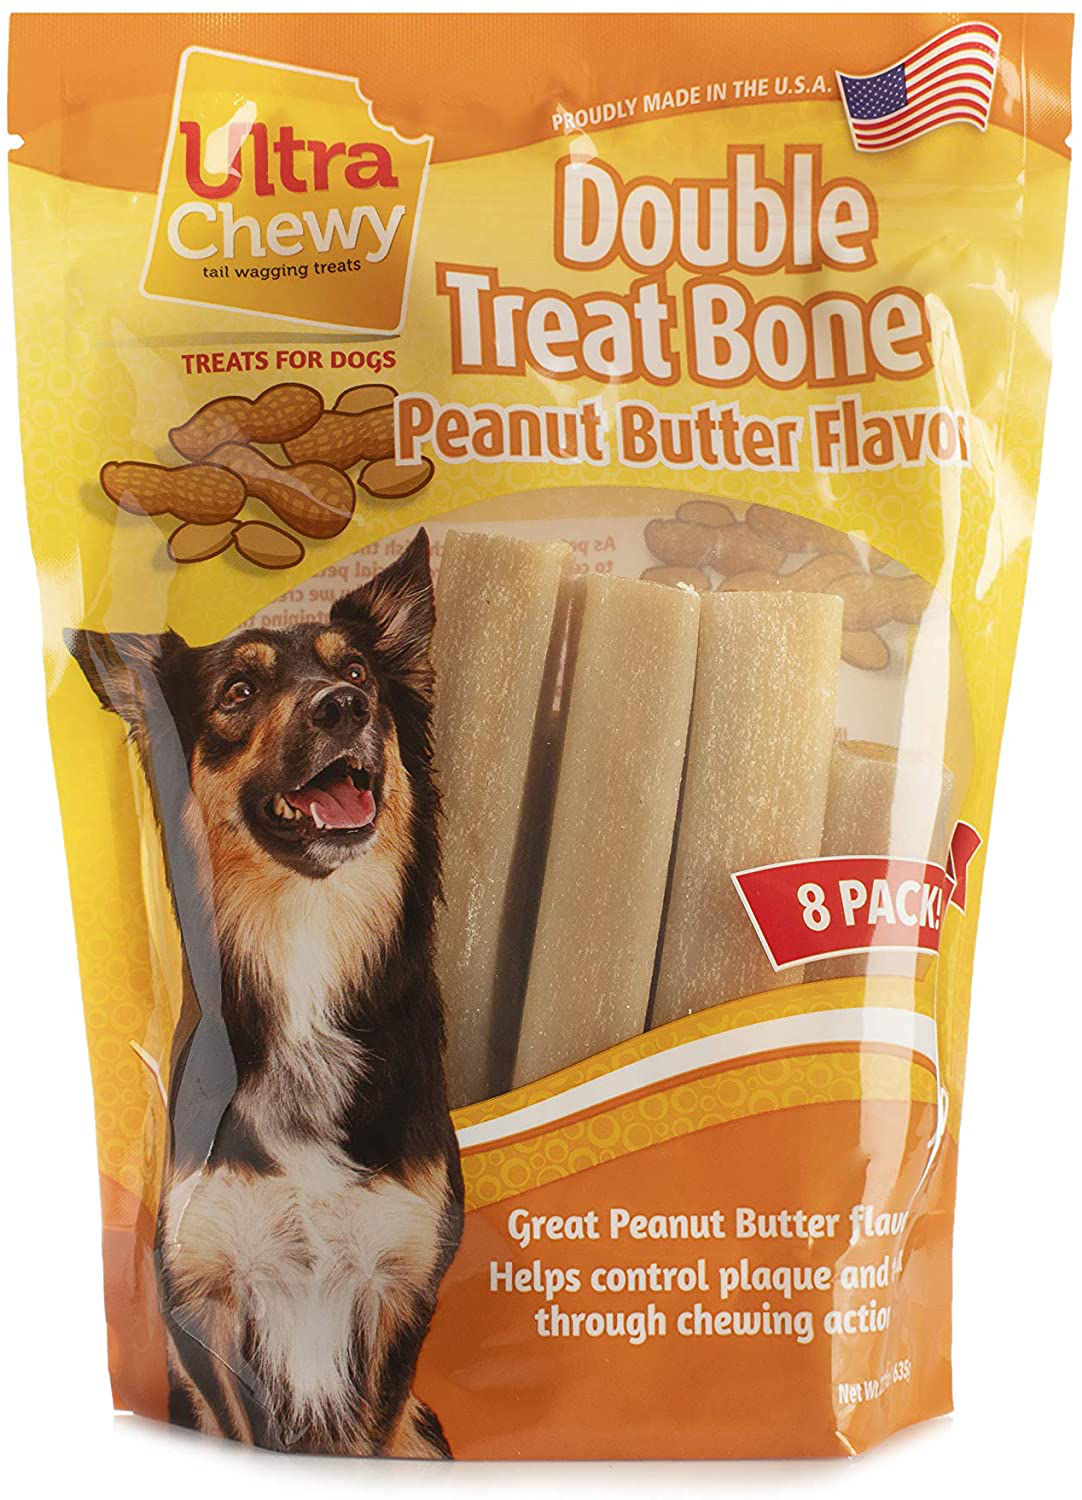 Ultra Chewy Naturals Dog Treats Bone - Made in USA - Highly Digestible Irresistible Flavors Special - Box with 2 Value Packs